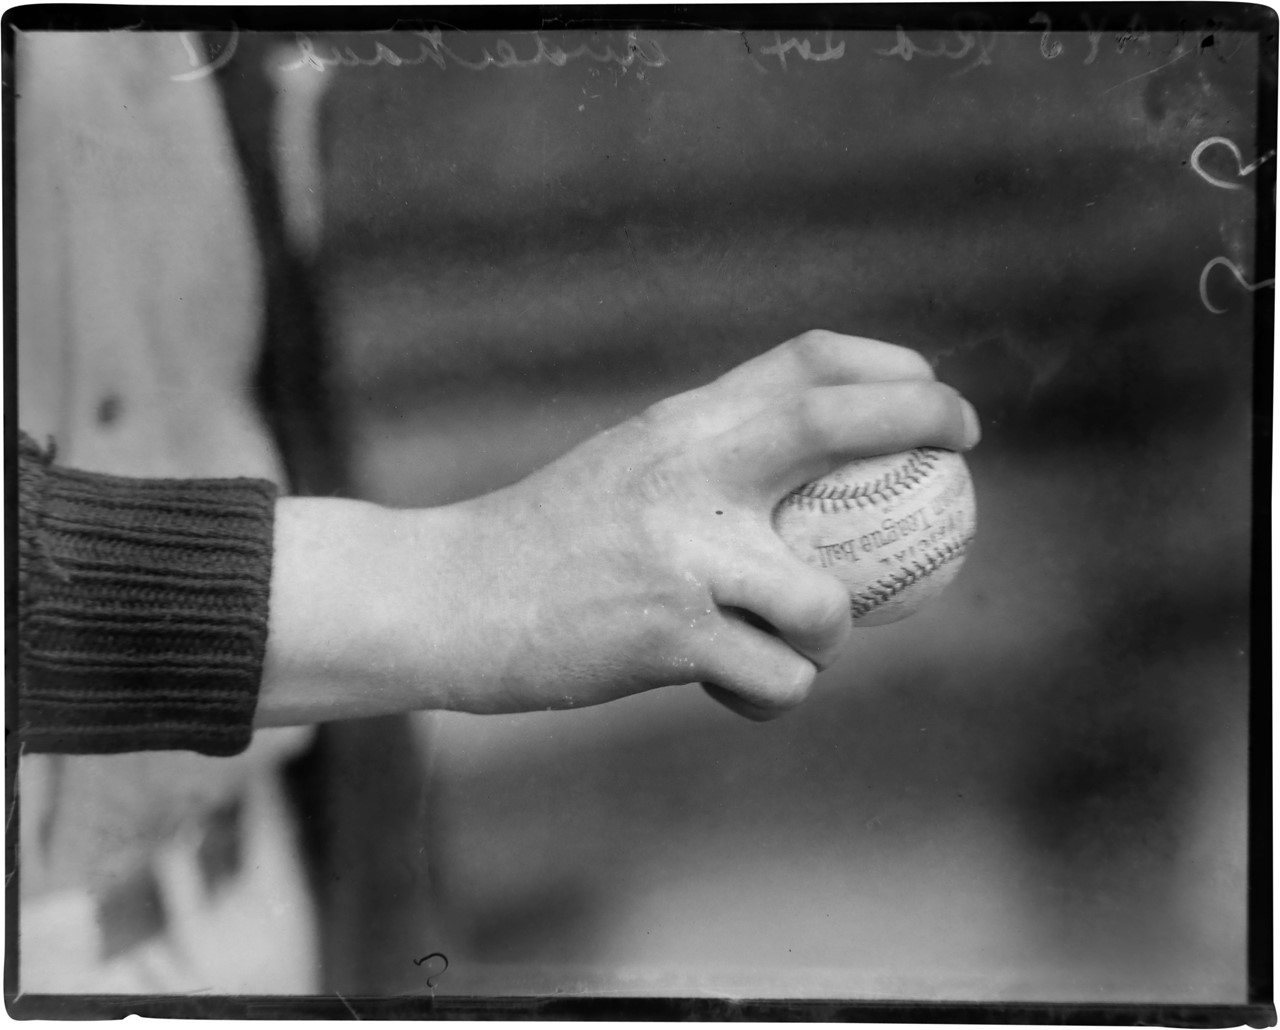 The Brown Brothers Collection - Carl Mays Overhand Pitching Grip Glass Plate Negative by Charles Conlon